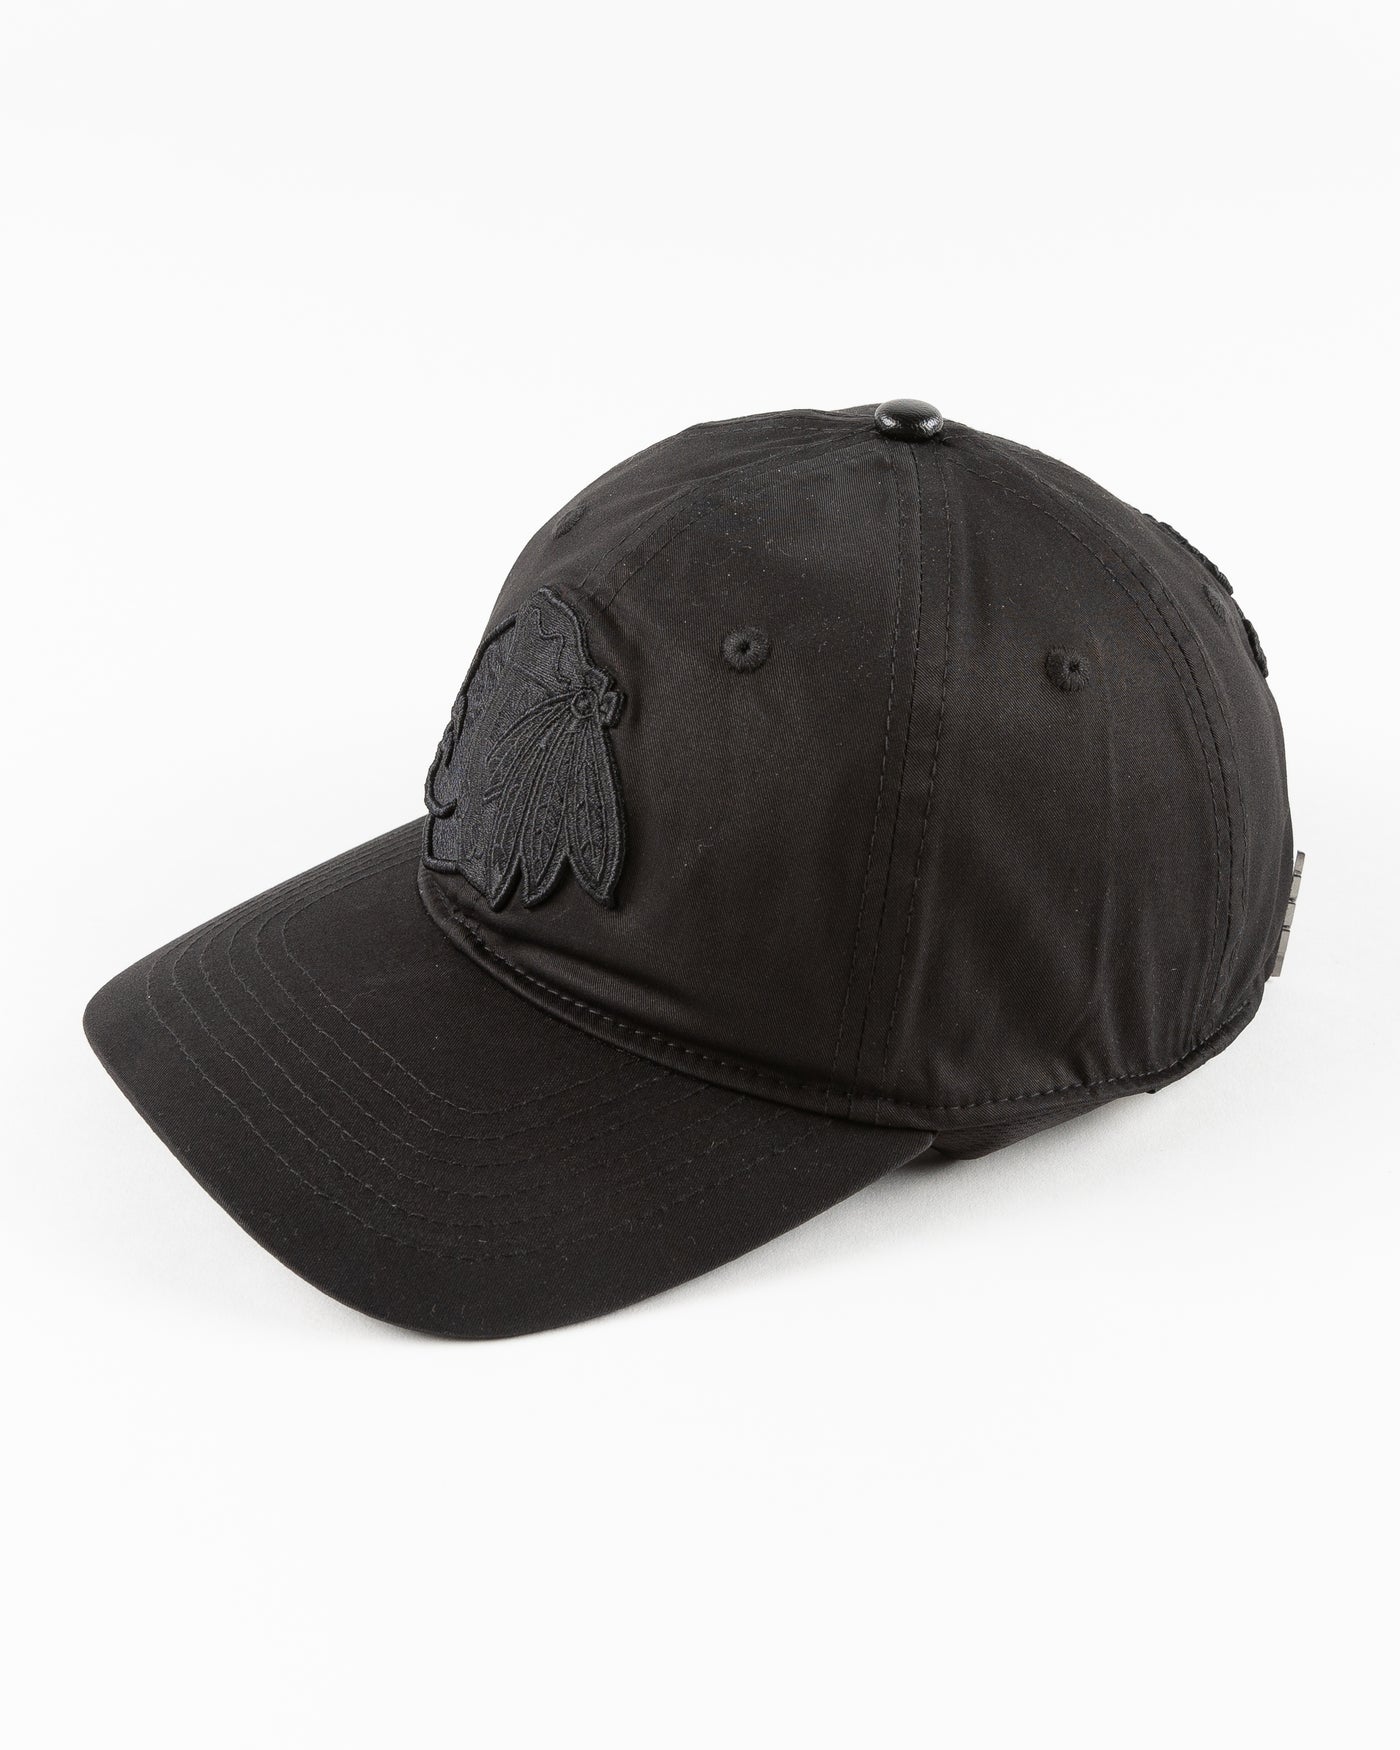 all black adjustable cap with tonal Chicago Blackhawks primary logo embroidered on front - left angle lay flat 